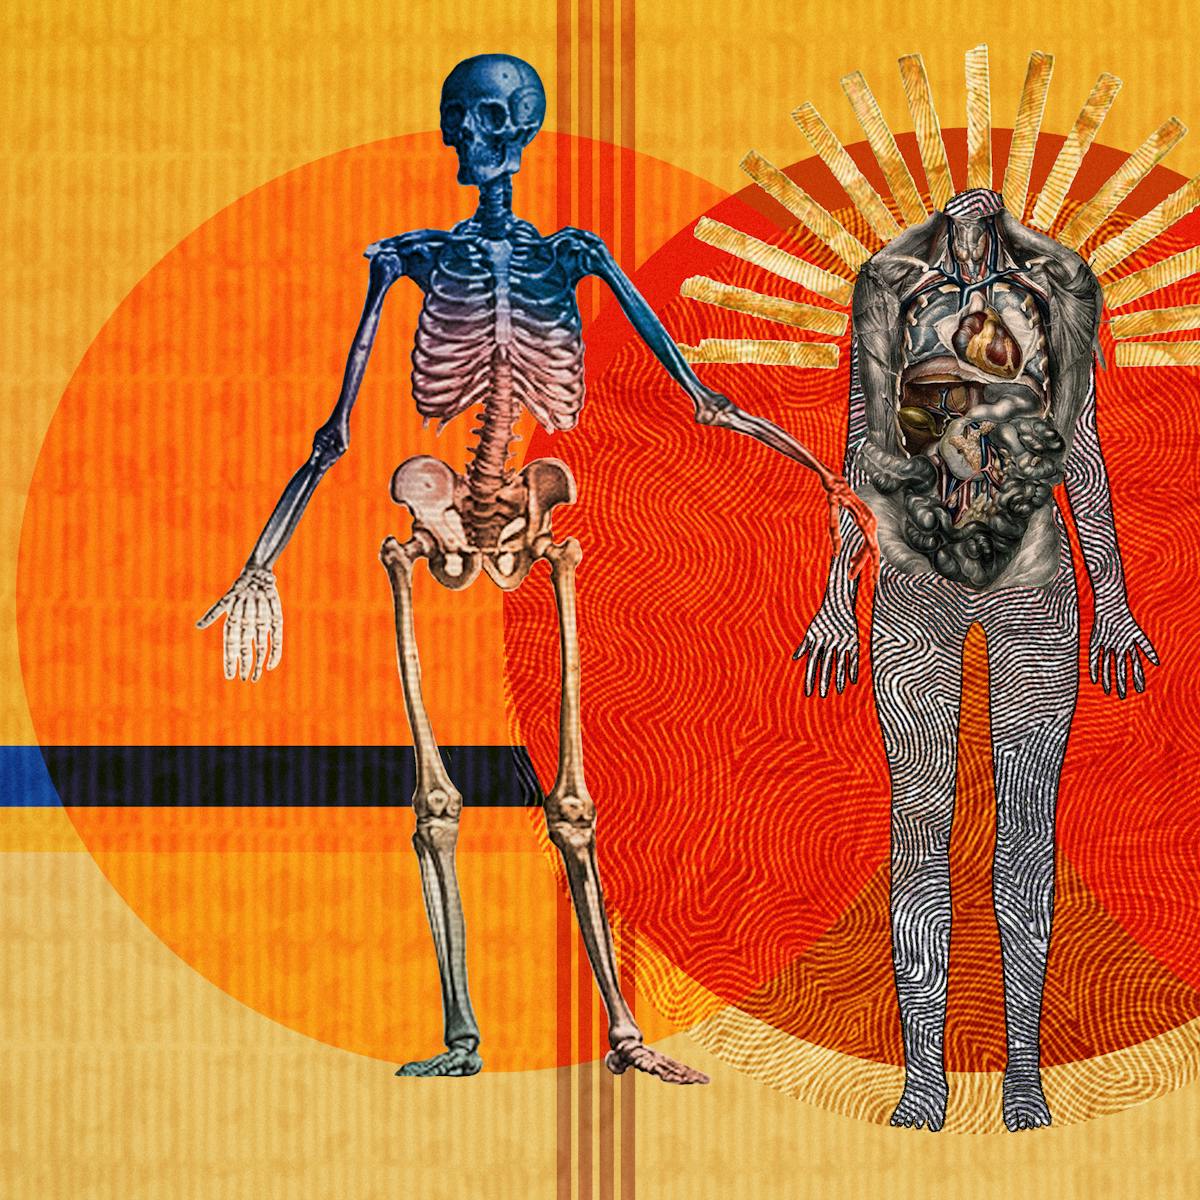 An abstract digital illustration featuring three anatomical depictions of the human body. The first shows the skeletal bone structure, the second reveals the major organs of the body and the third depicts the muscular structure. Circles of energy are shown to be radiating from each of the bodies, overlapping each other. The main colour combinations are yellows, reds and oranges. The background shapes contain textures and patterns.